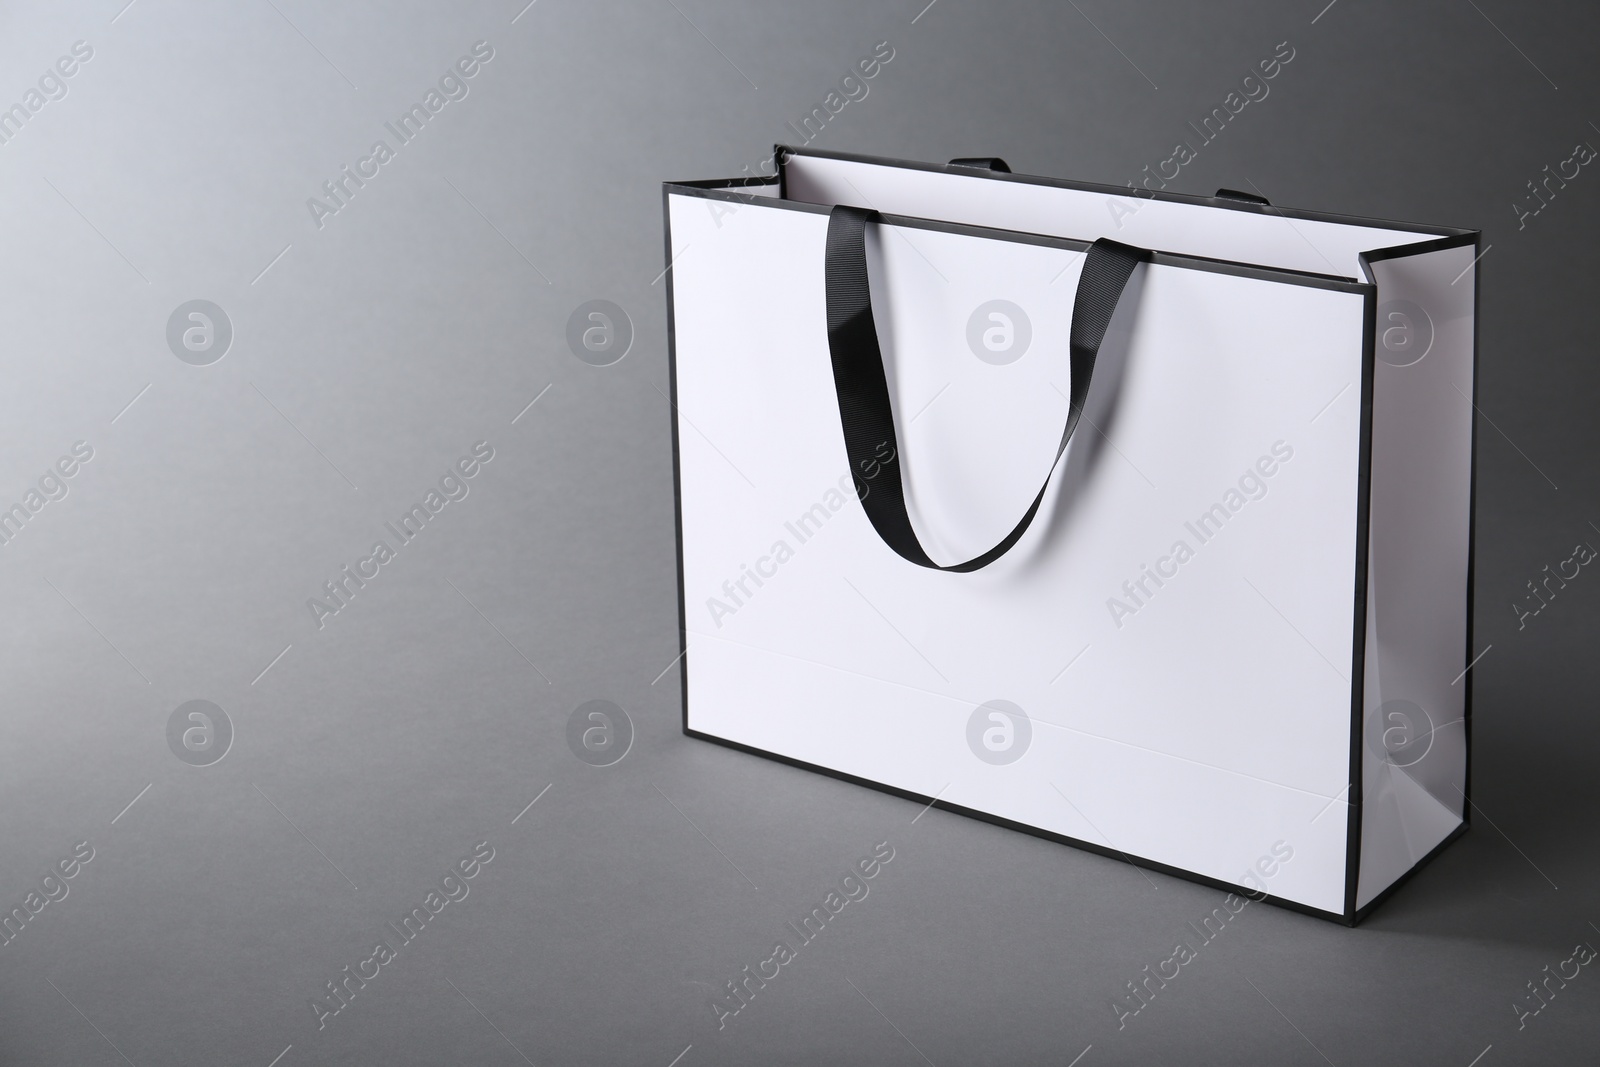 Photo of One paper bag on grey background, space for text. Mockup for design